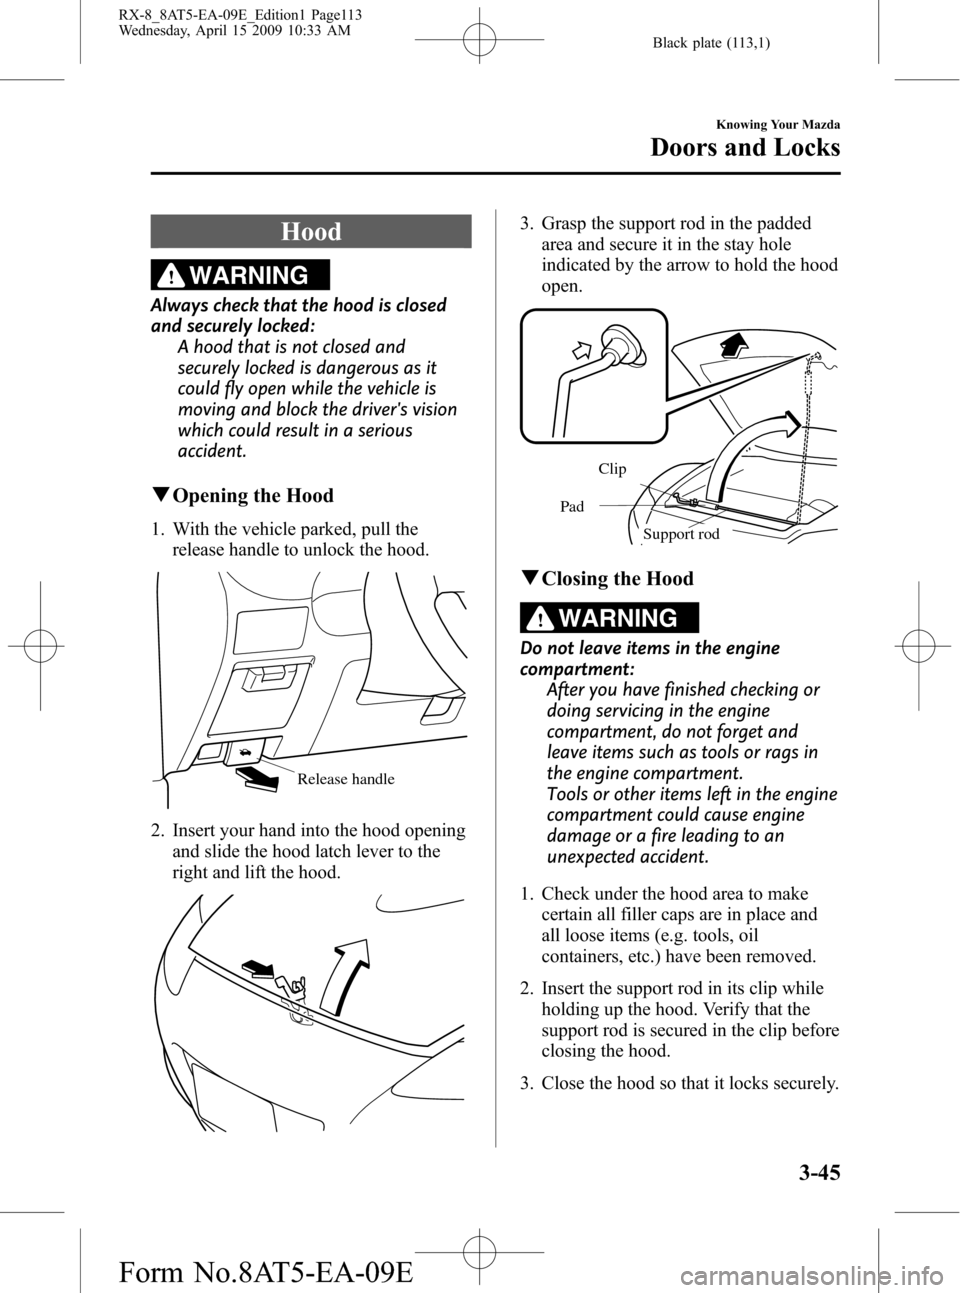 MAZDA MODEL RX 8 2010  Owners Manual (in English) Black plate (113,1)
Hood
WARNING
Always check that the hood is closed
and securely locked:
A hood that is not closed and
securely locked is dangerous as it
could fly open while the vehicle is
moving a